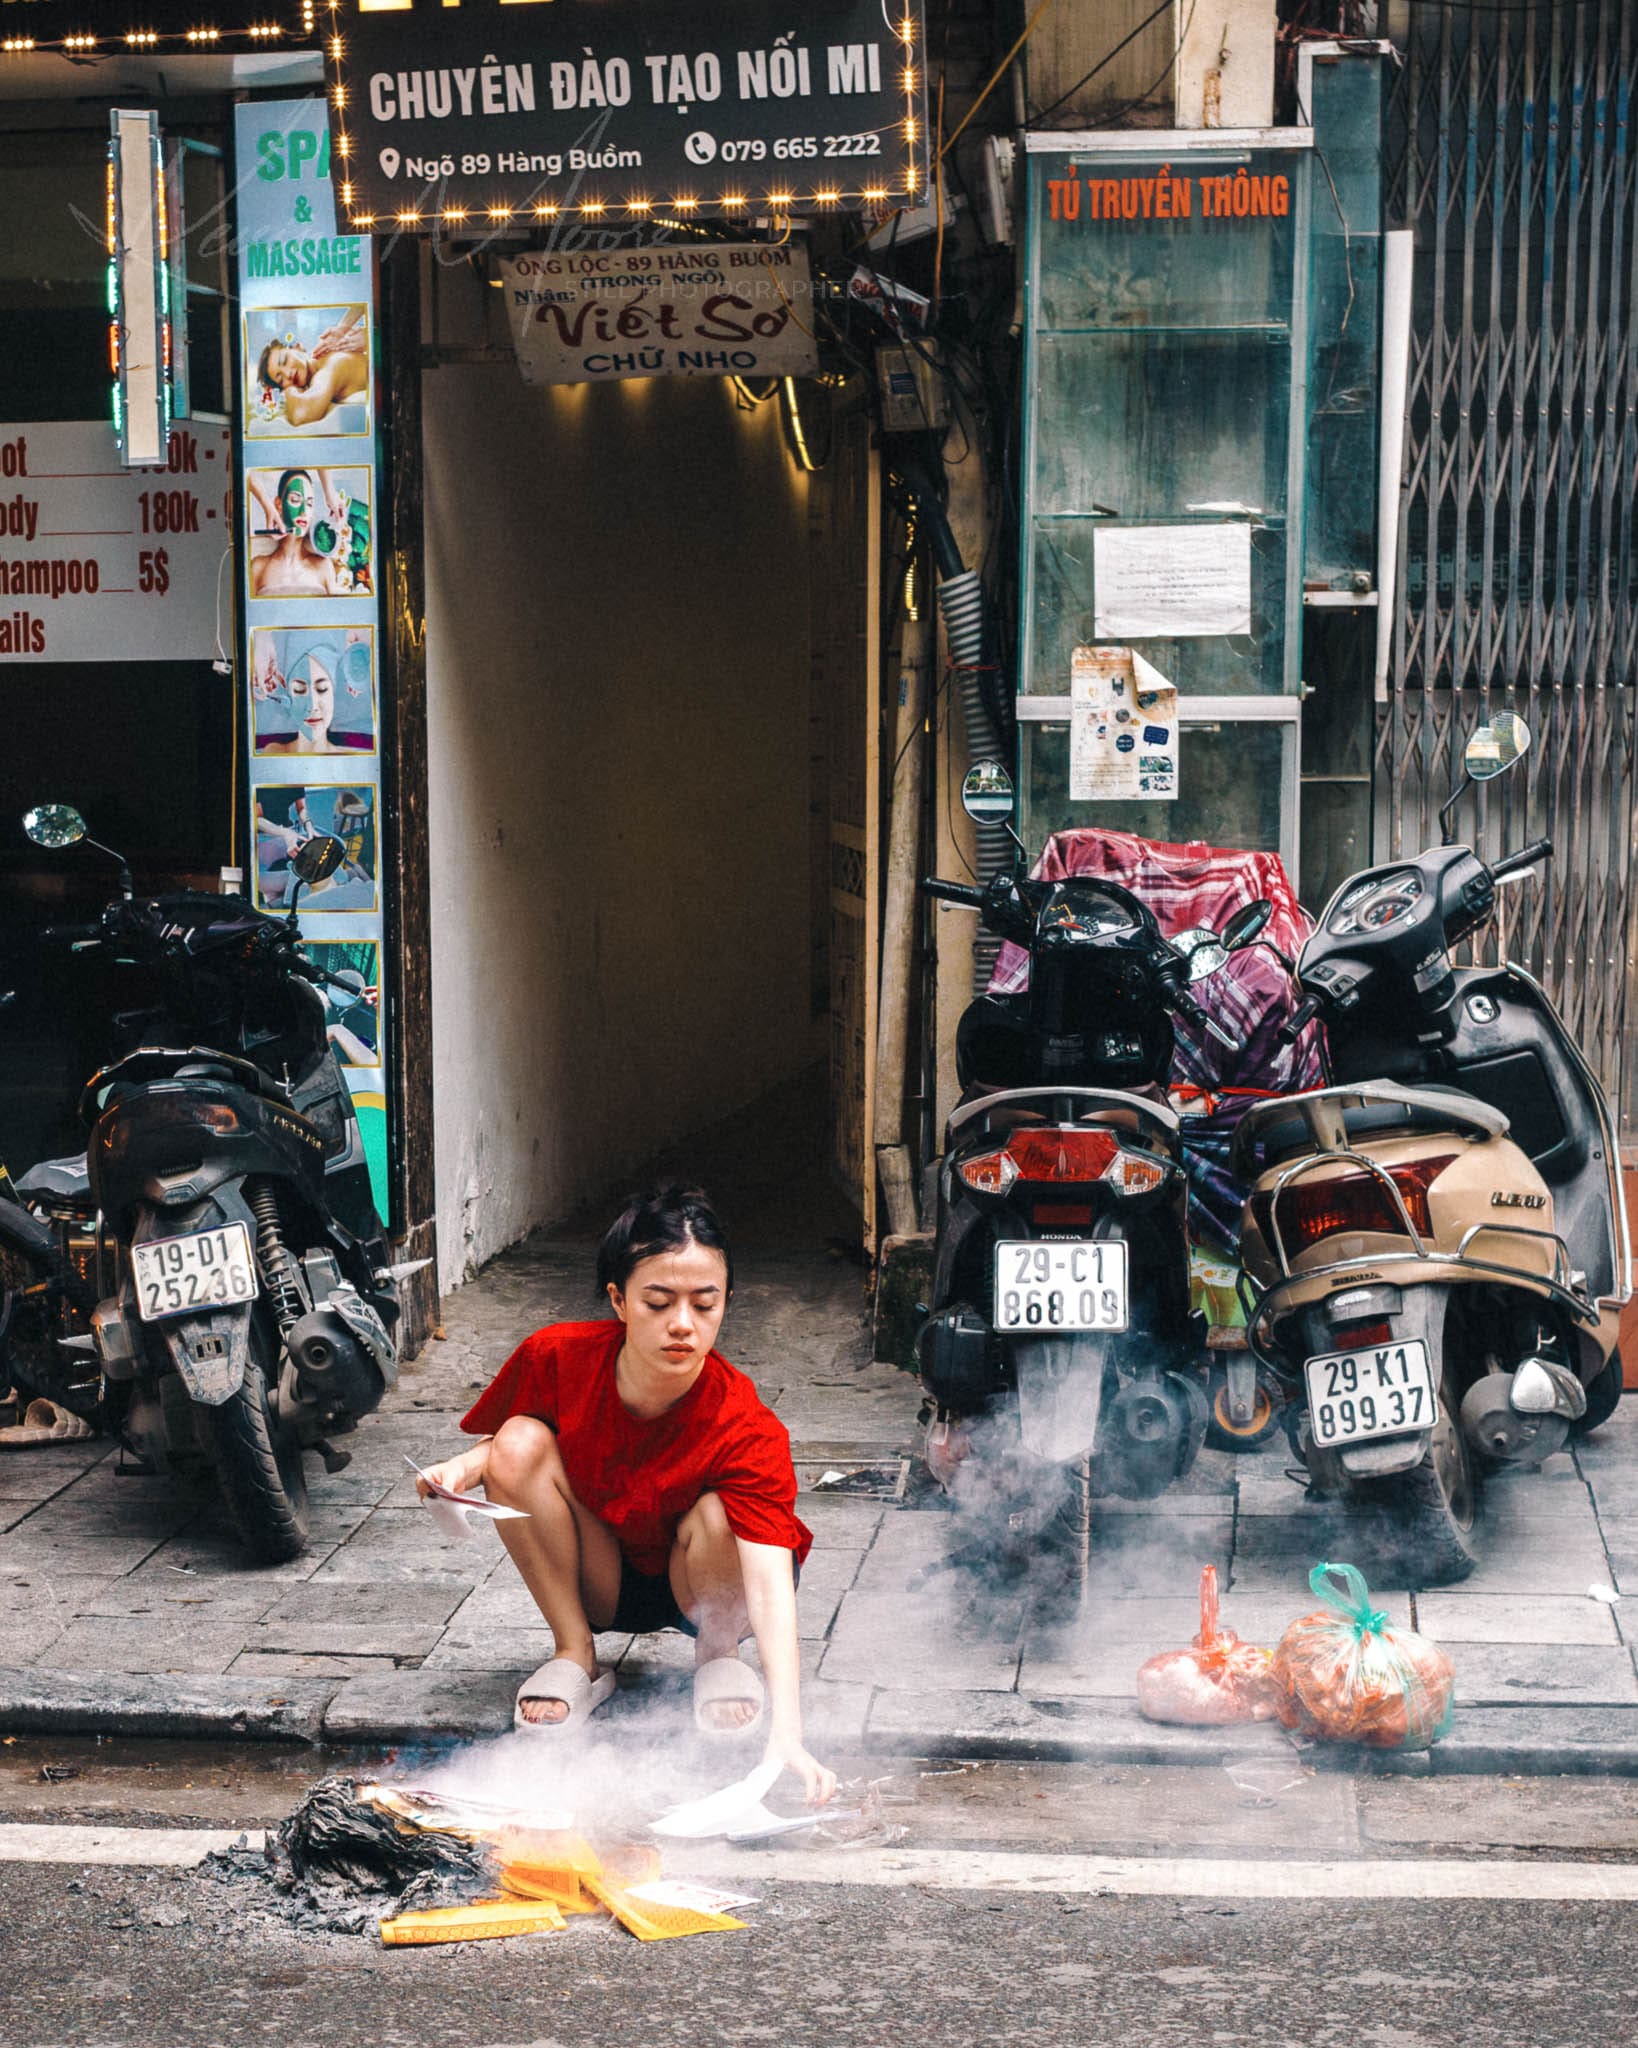 Vietnamese woman performing street ritual with fire amidst urban setting with motorbikes.